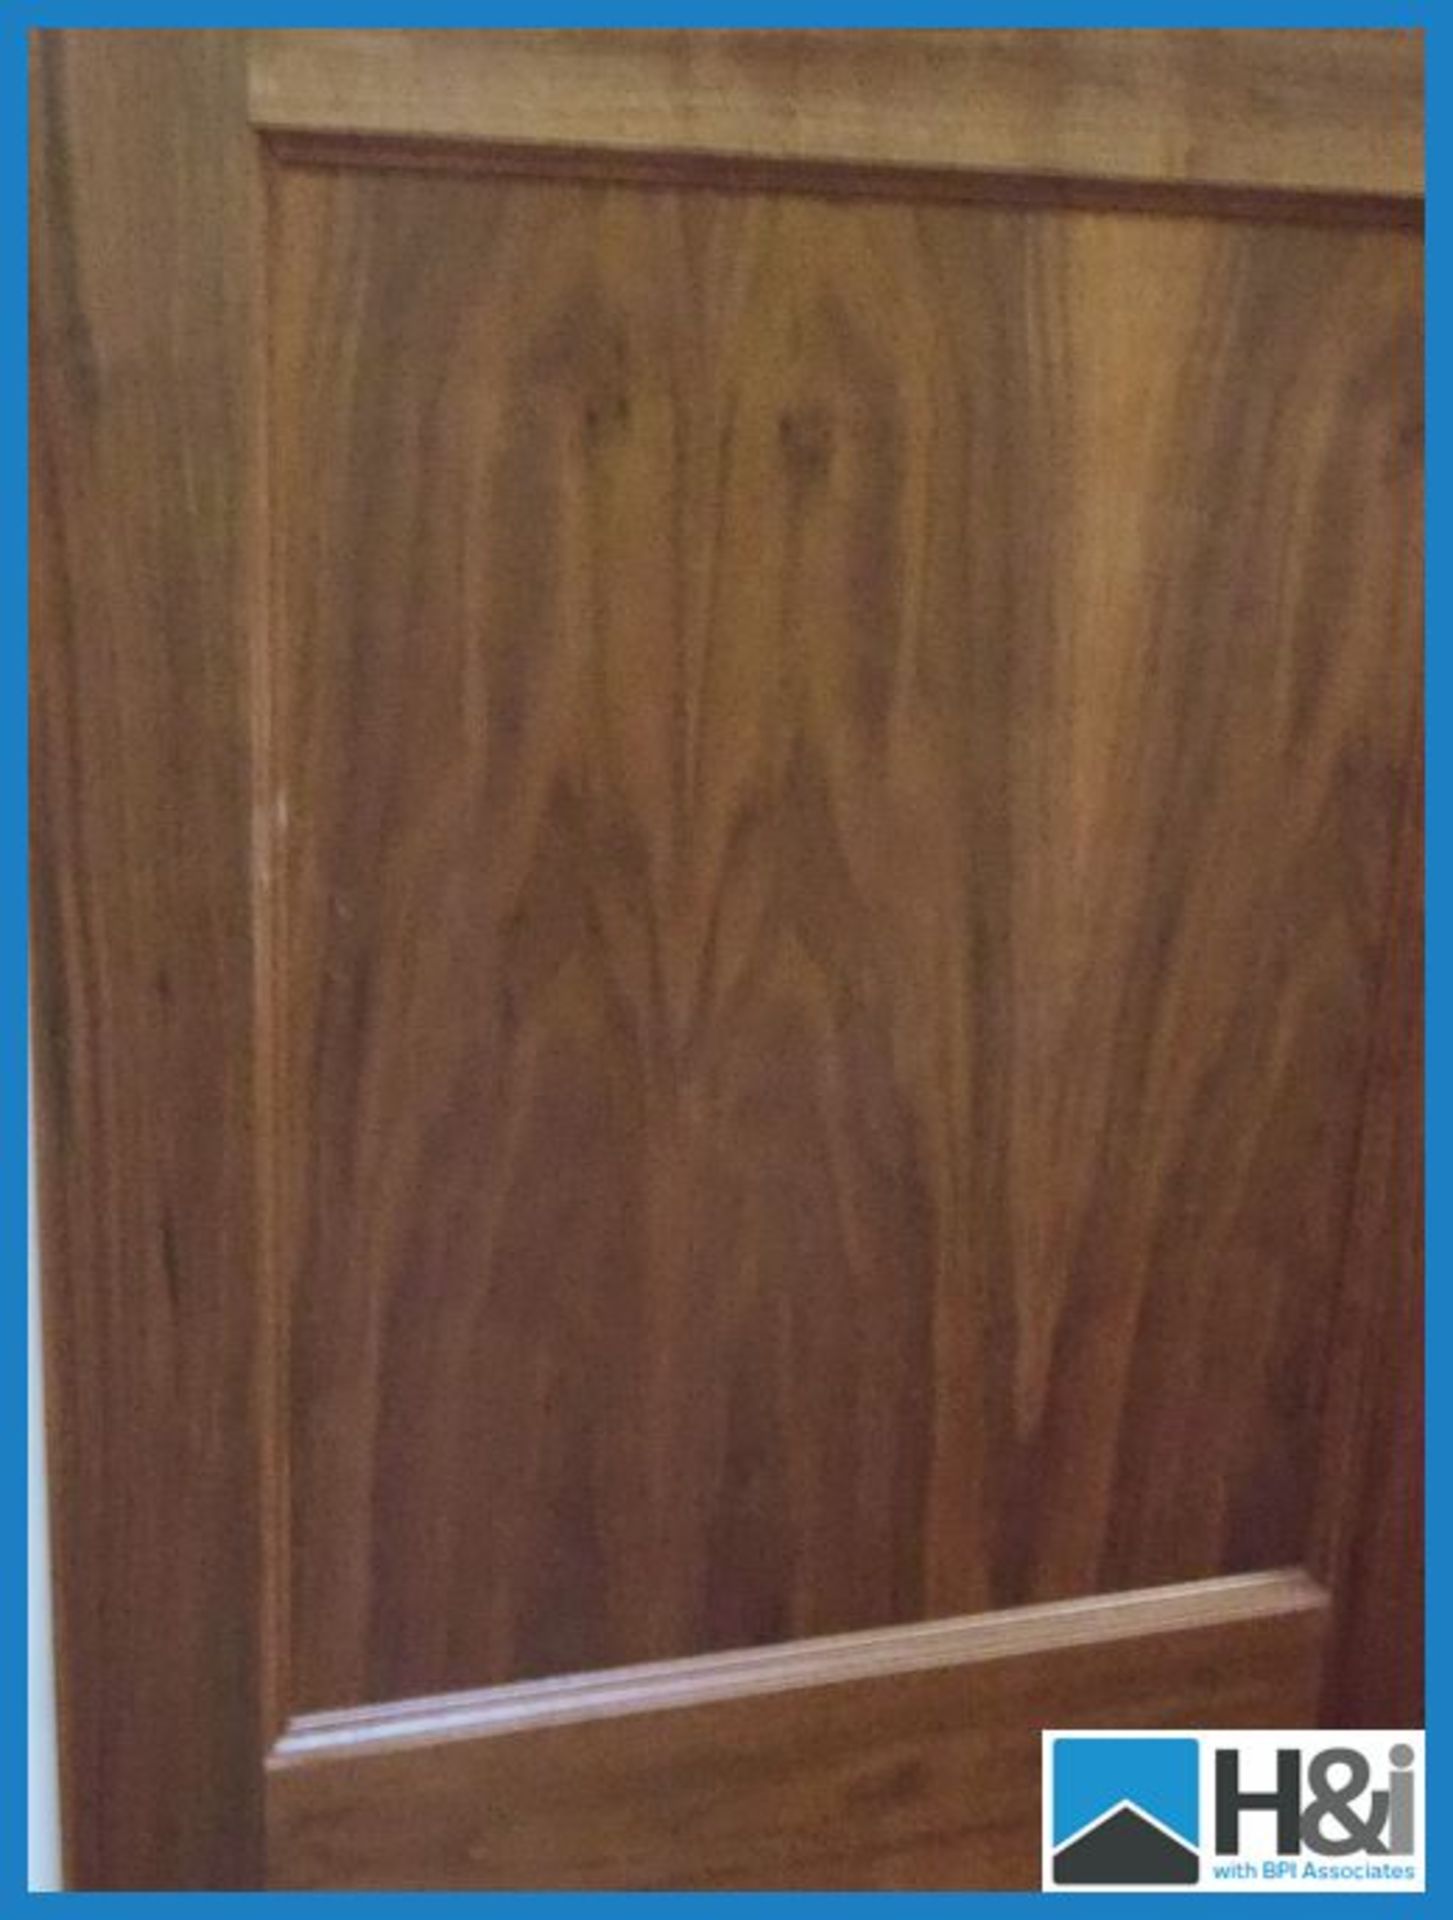 Brand new in sealed packaging Walnut 'Arden' exterior door 78" x 33" 44mm thickness with two flat - Image 2 of 4